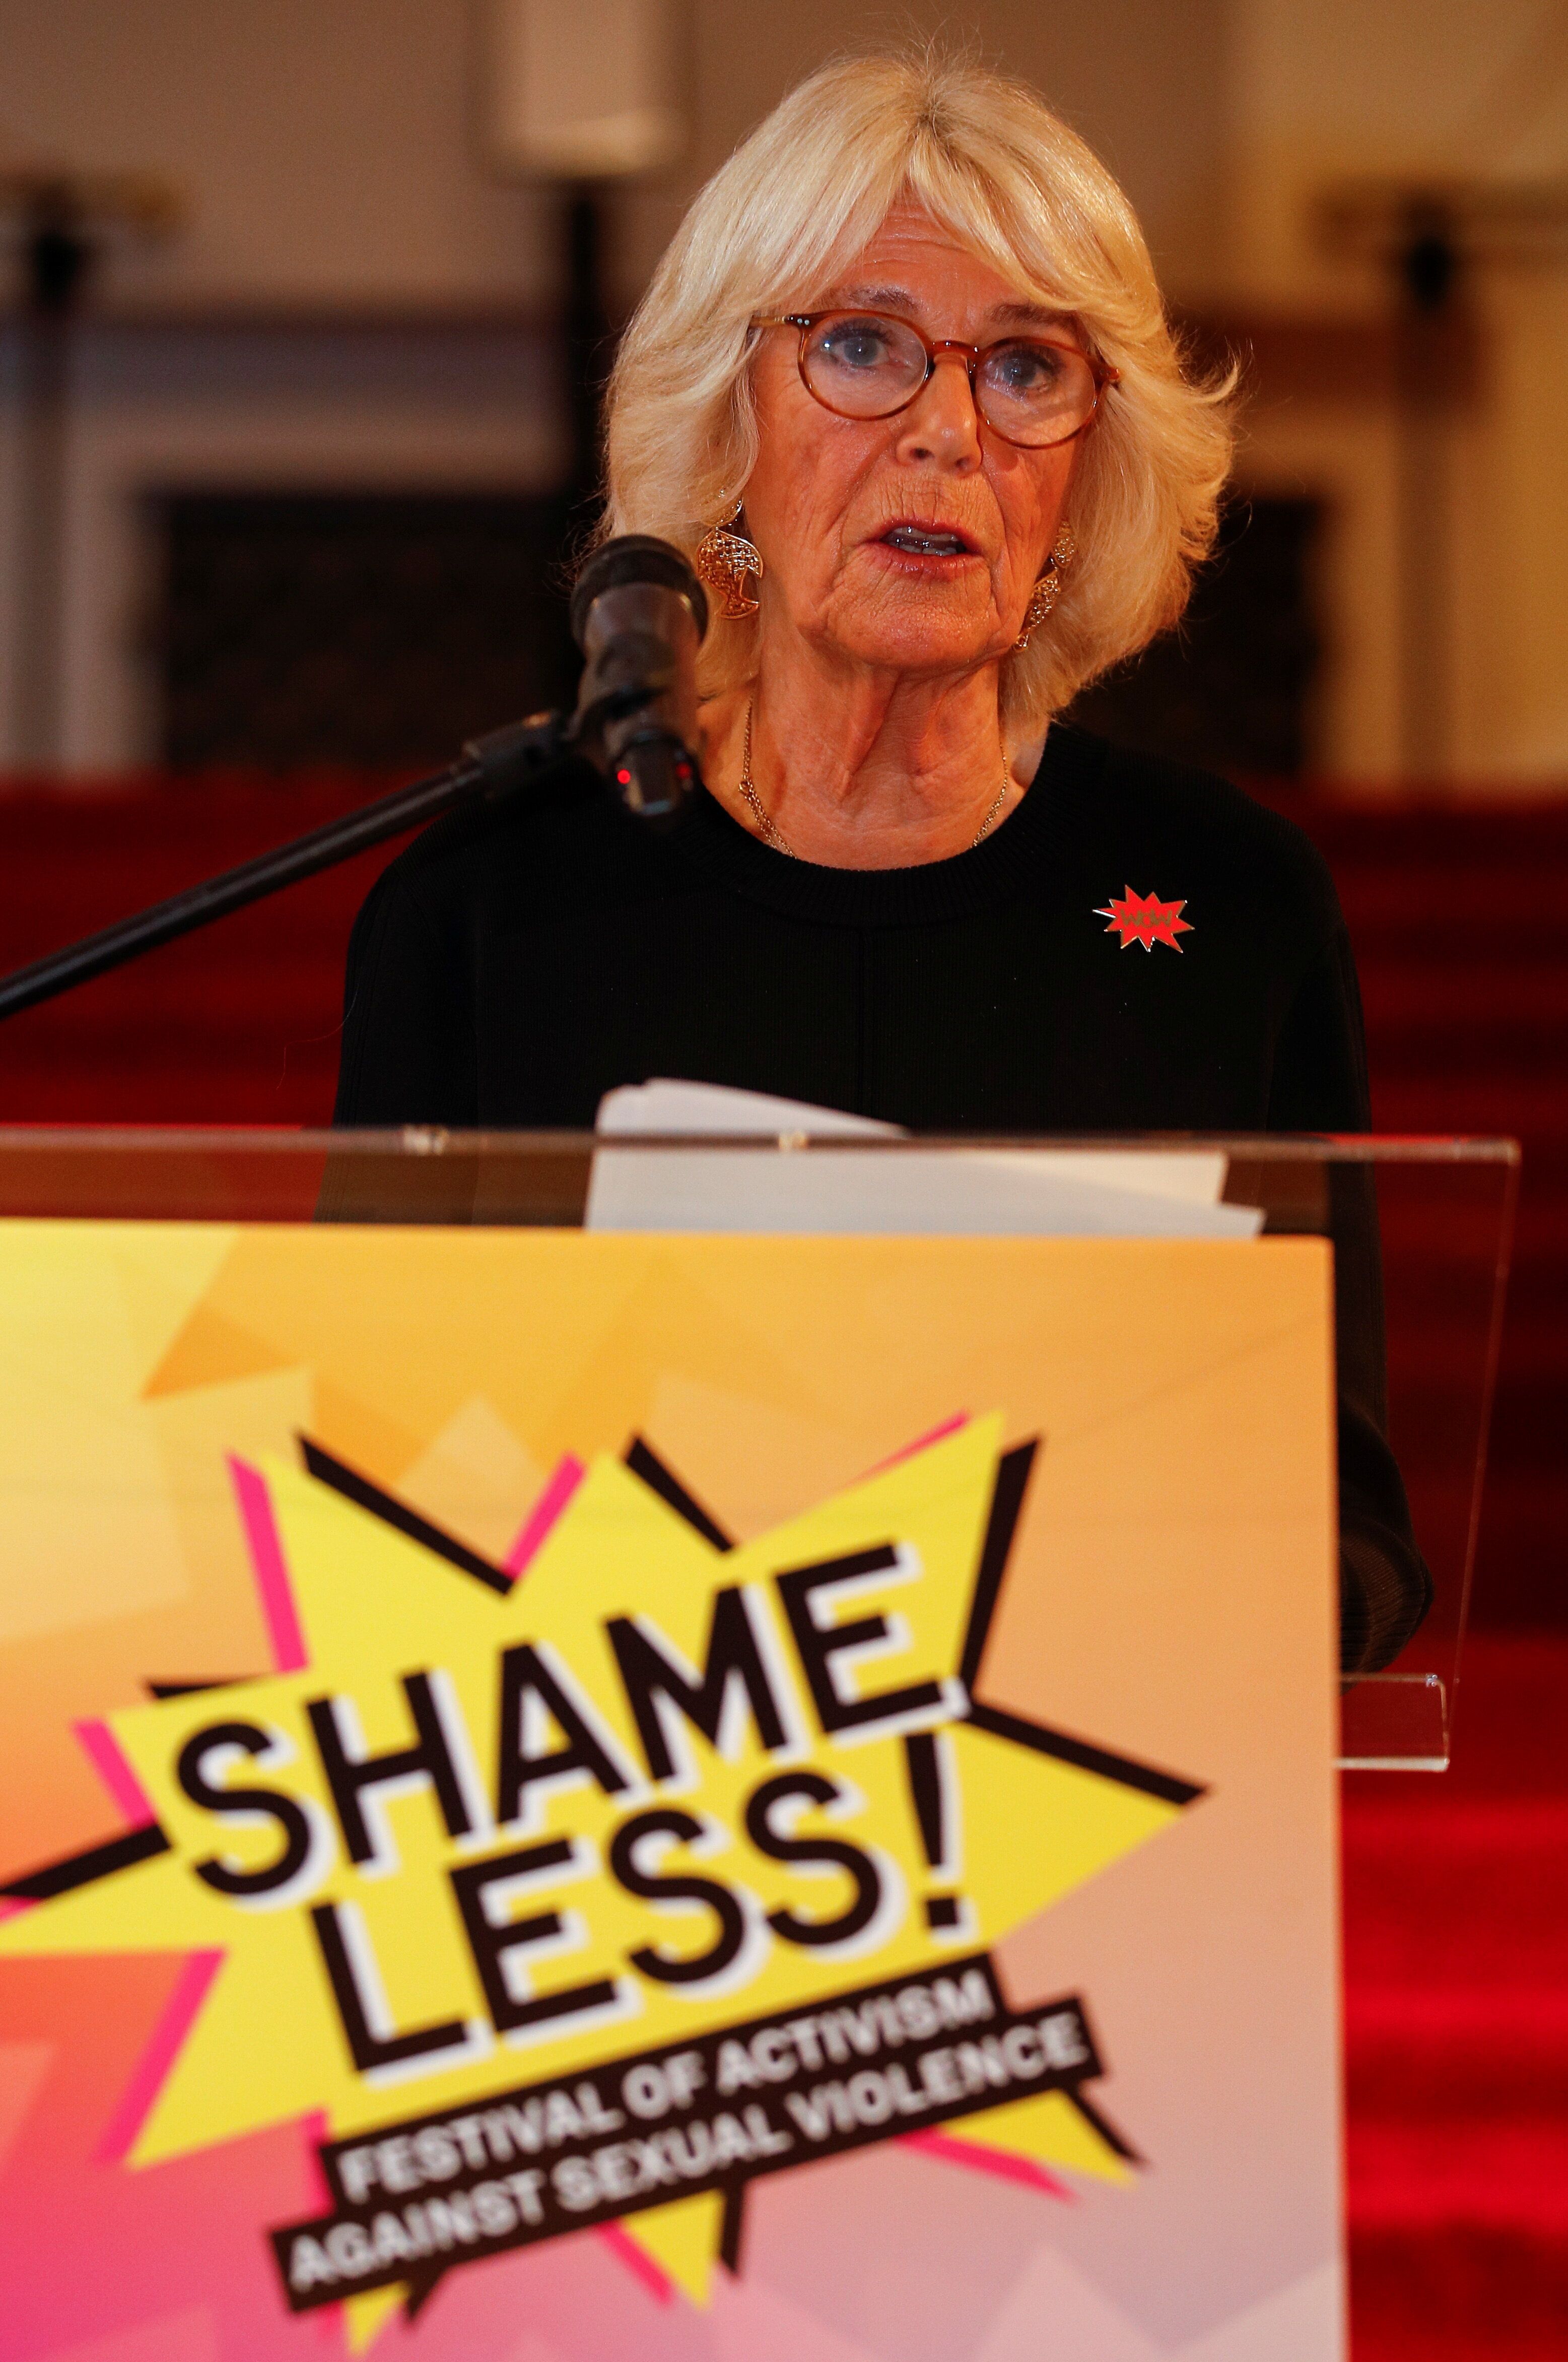 Camilla, Duchess of Cornwall speaks during a reception for the Shameless! Festival on Oct. 27 in London.